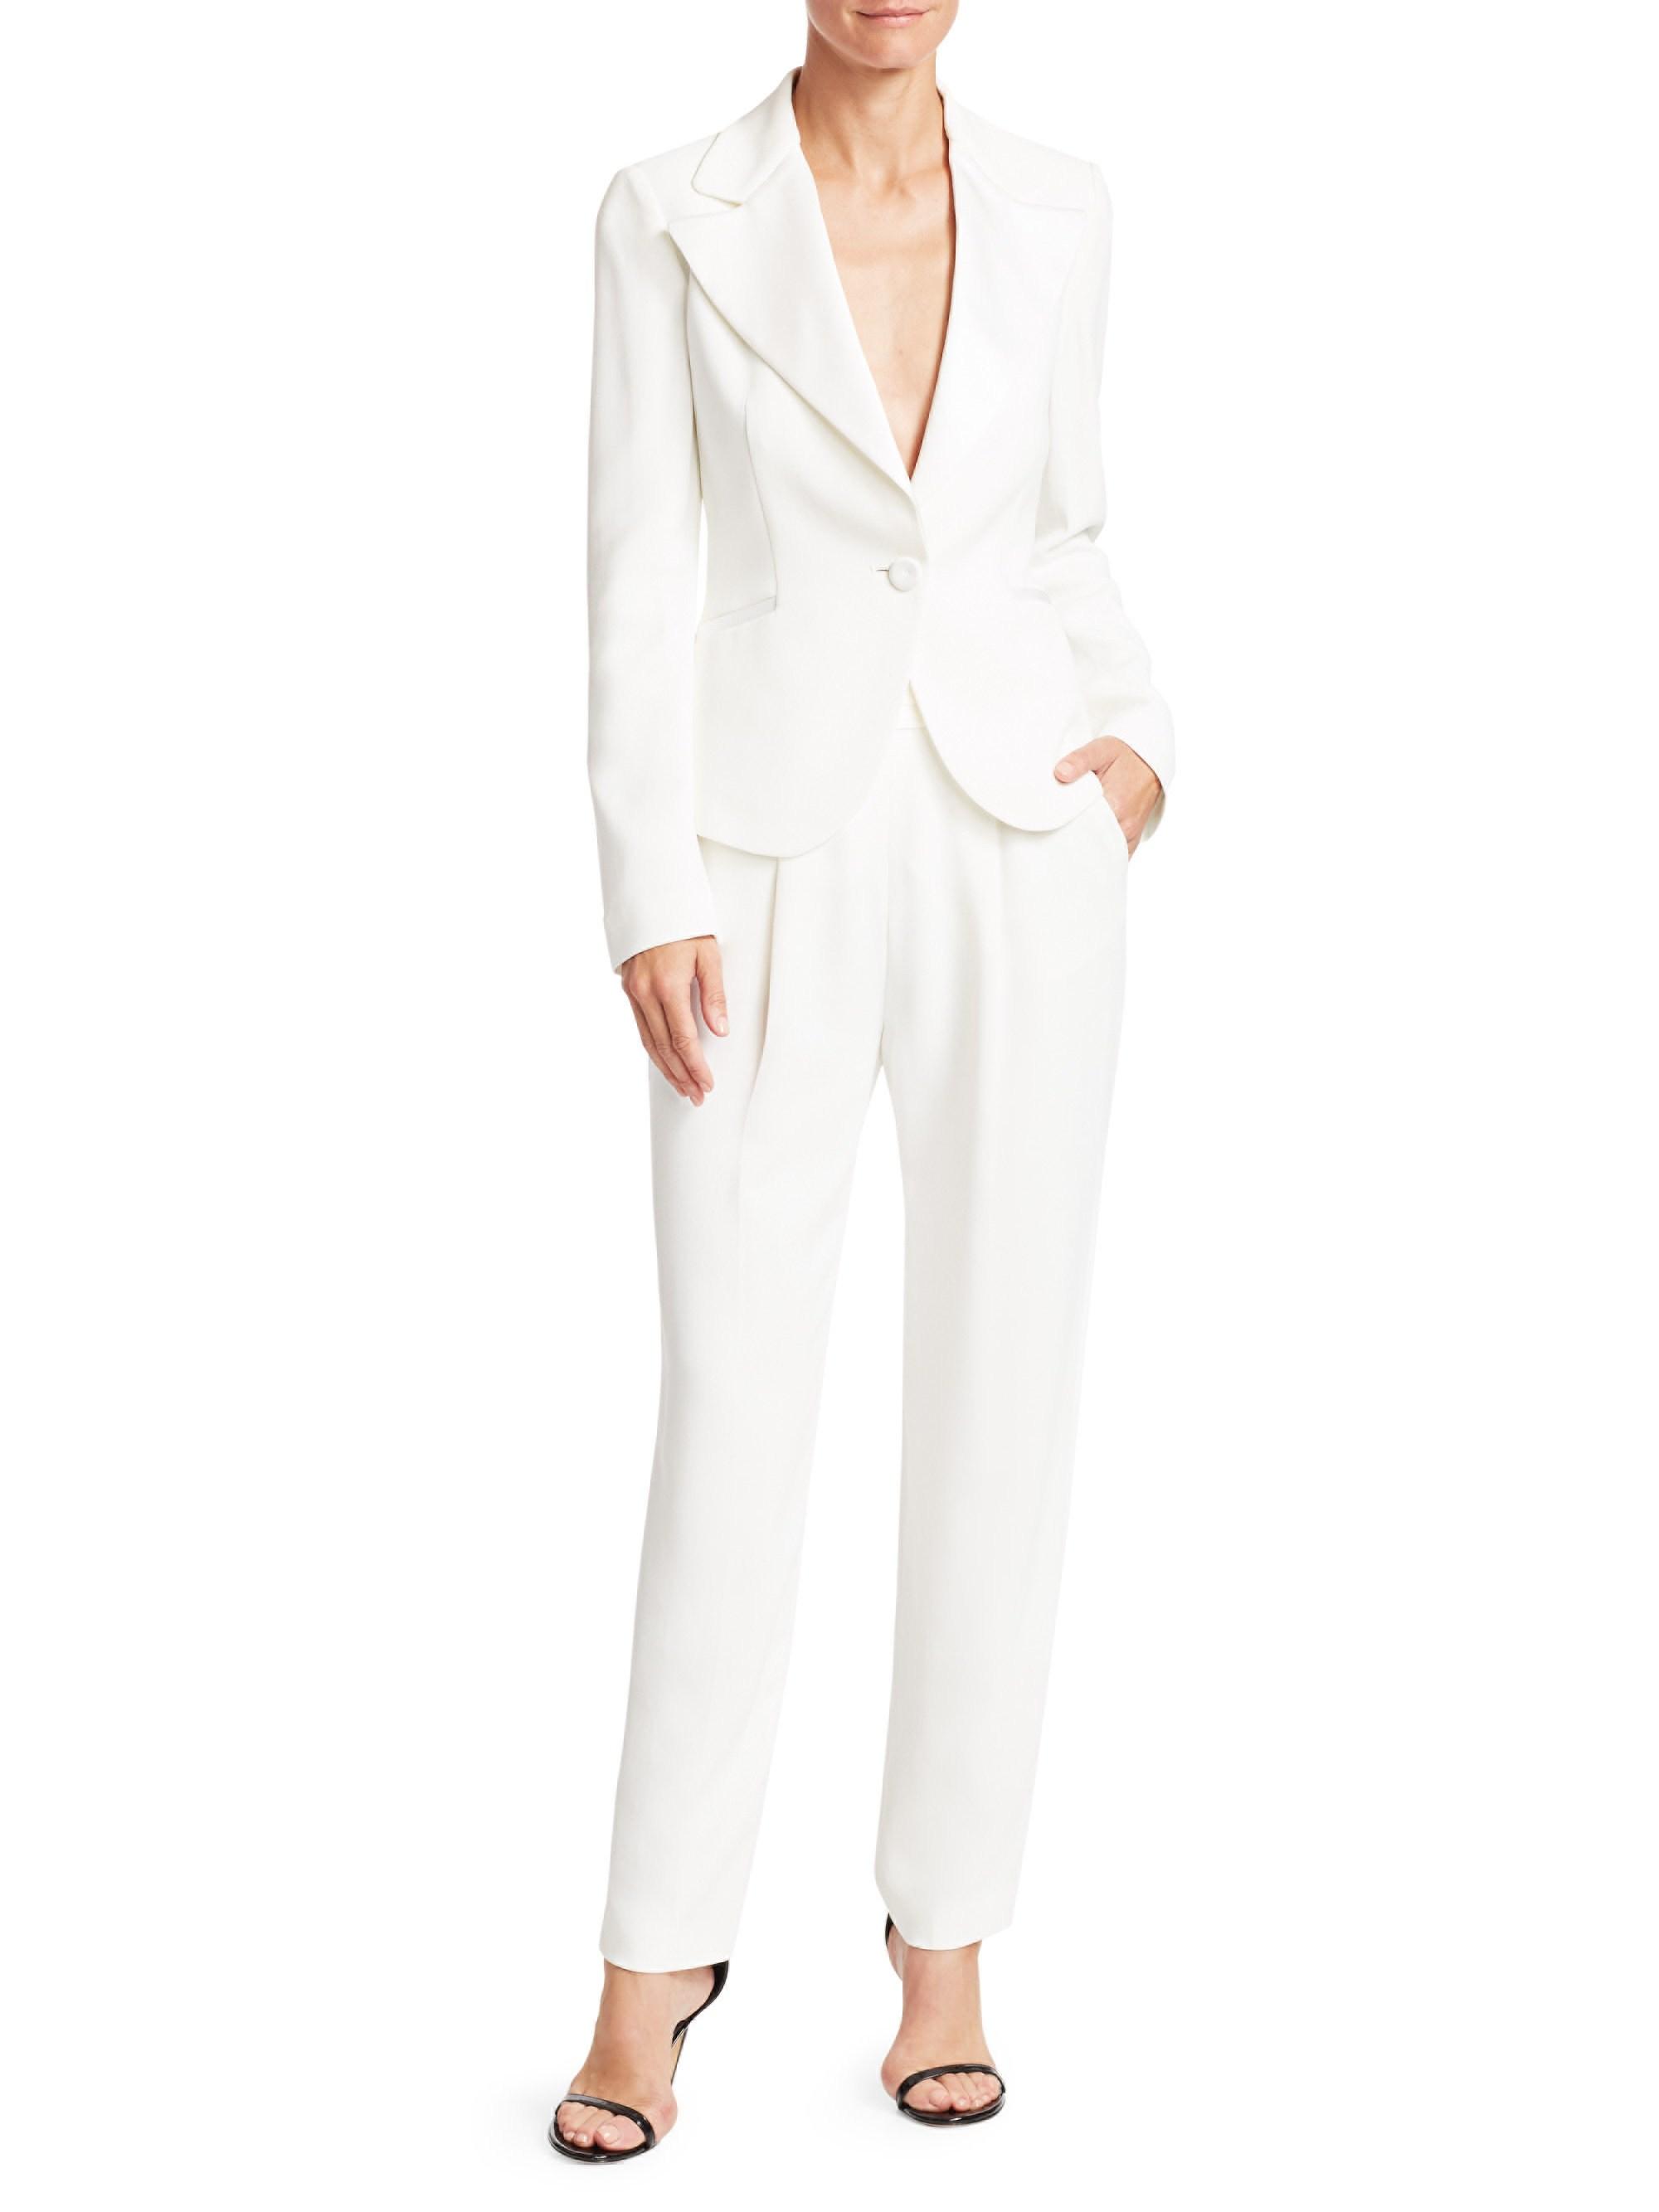 Emporio Armani Silk Cady Straight Pants in White - Lyst